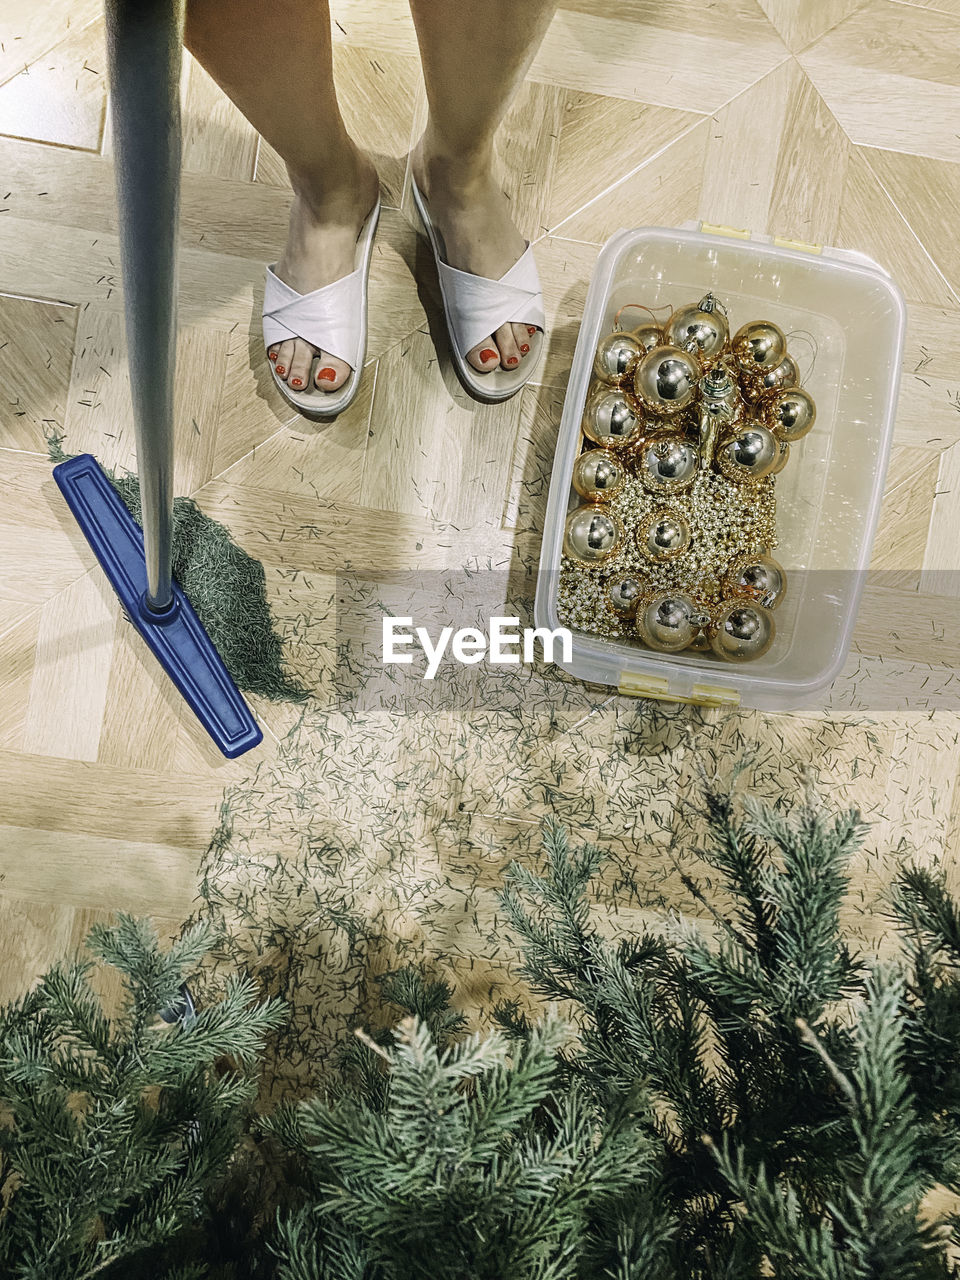 Cleaning of dry christmas tree with toy balls on the floor and needles crumbled. after new year